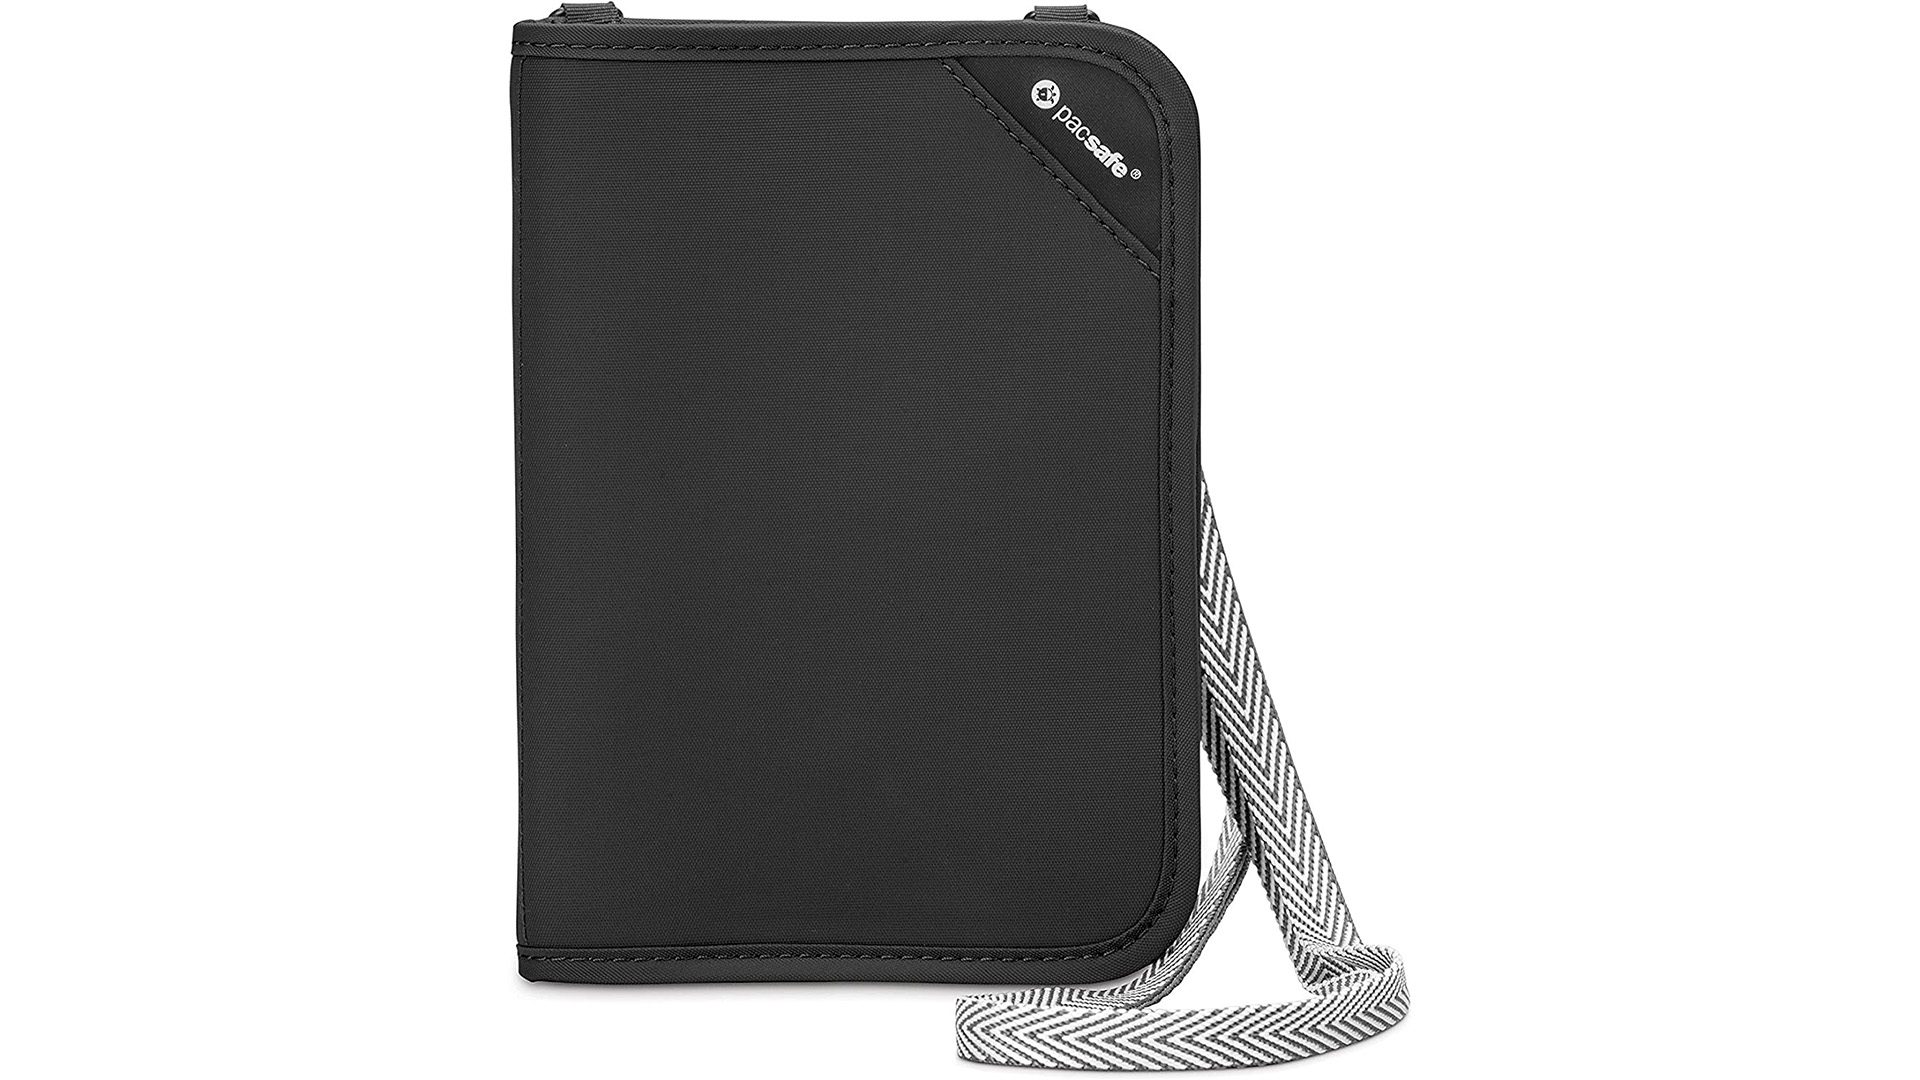 Pacsafe Rfidsafe V150 Compact Passport Wallet with Anti-Theft Lock